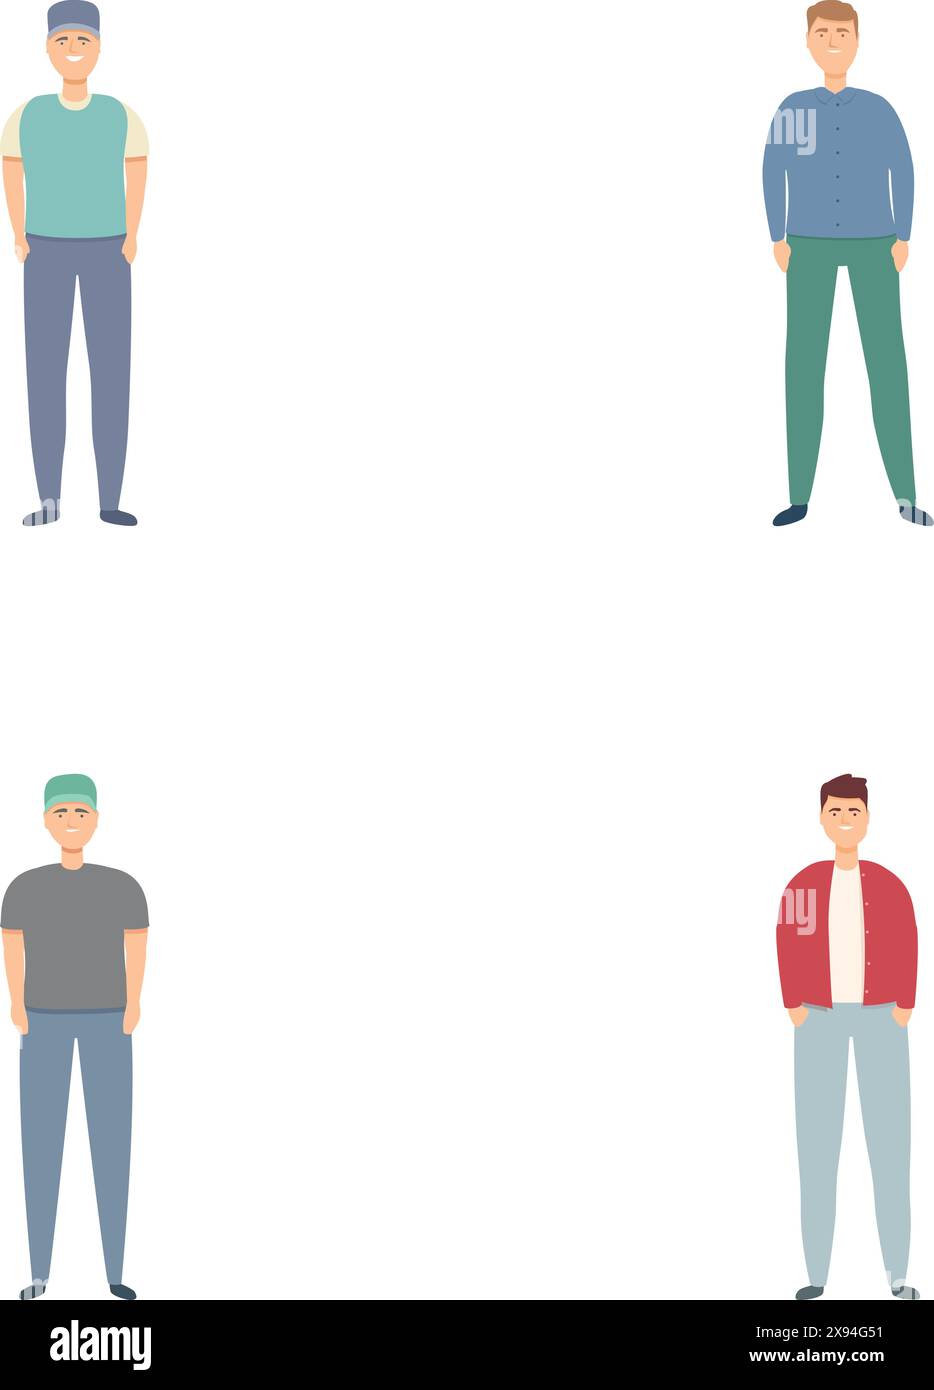 Vector illustration showcasing four diverse men standing in casual clothing styles, isolated on a white background Stock Vector